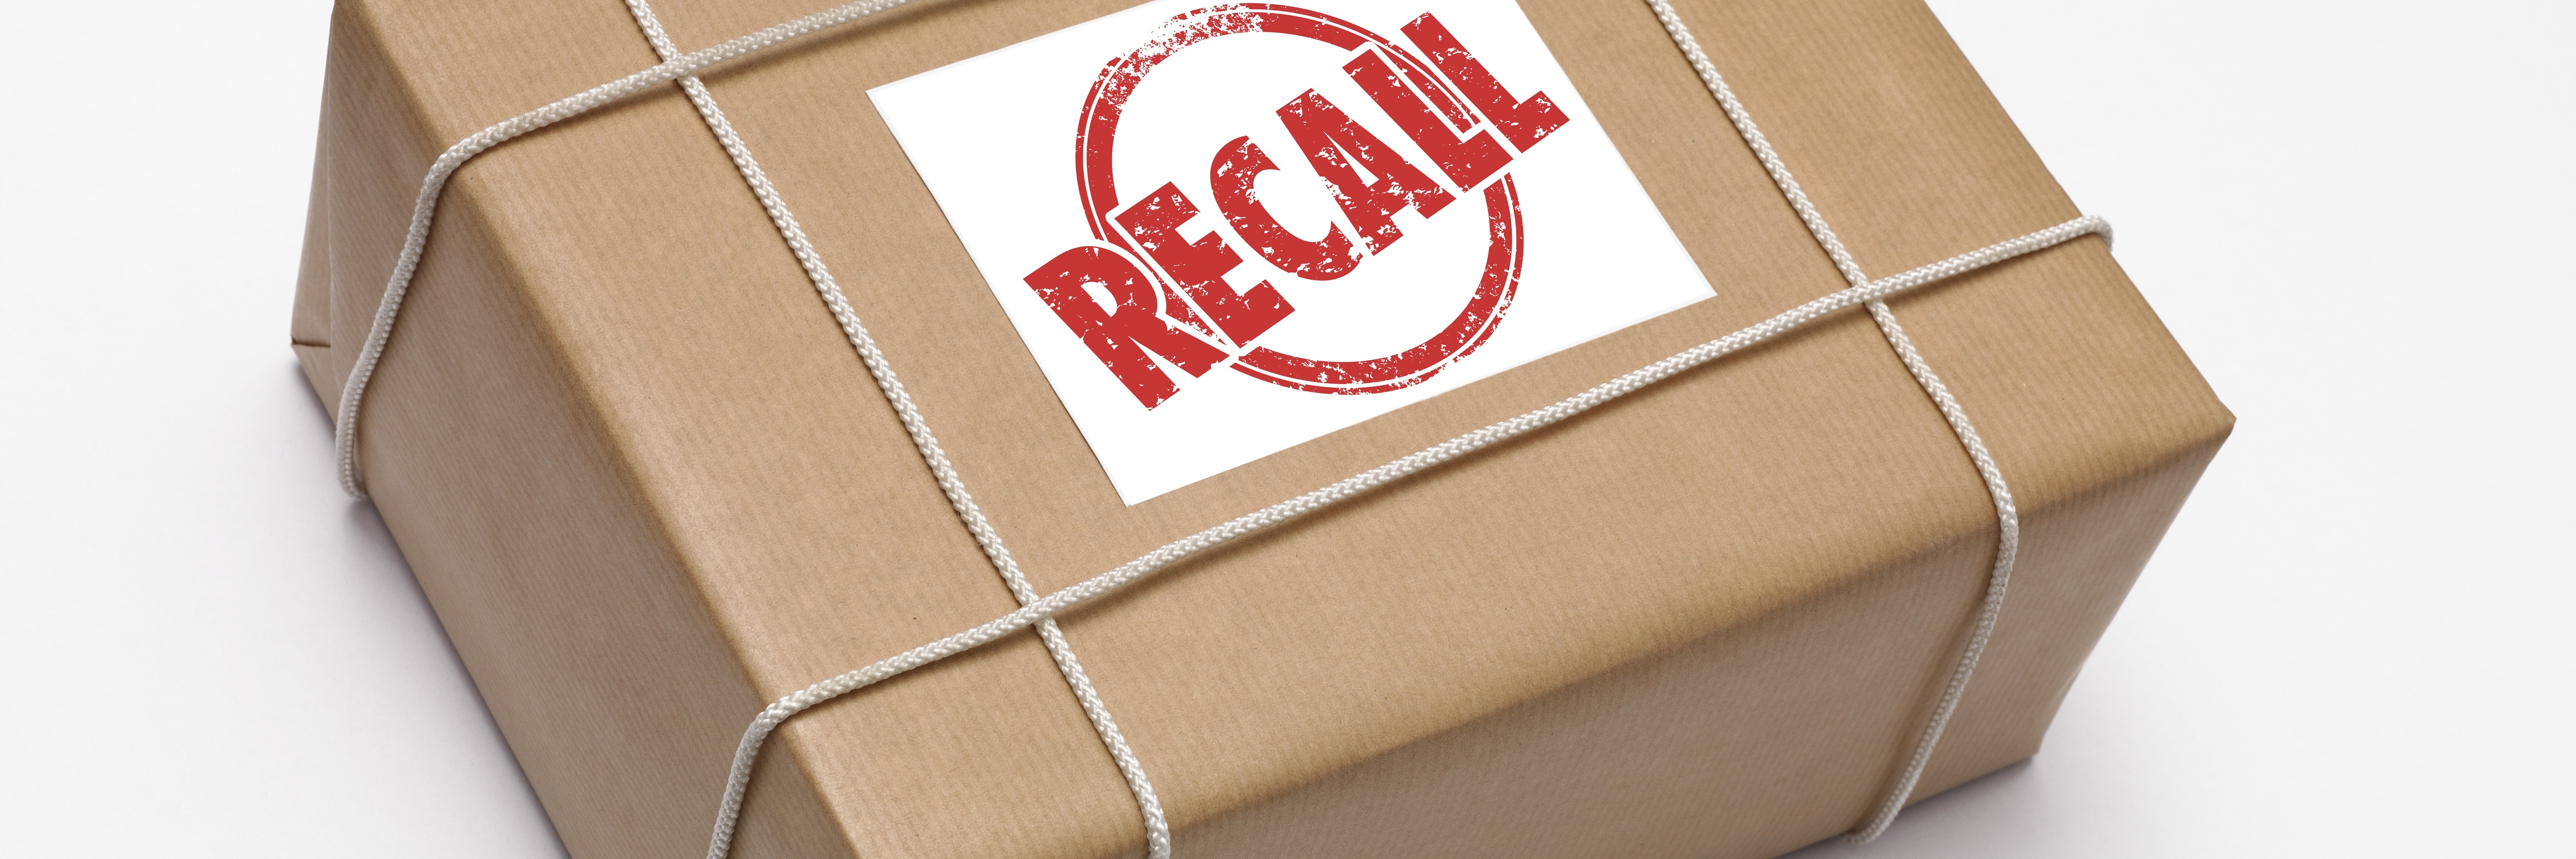 Growing number of product recalls in the automotive industry